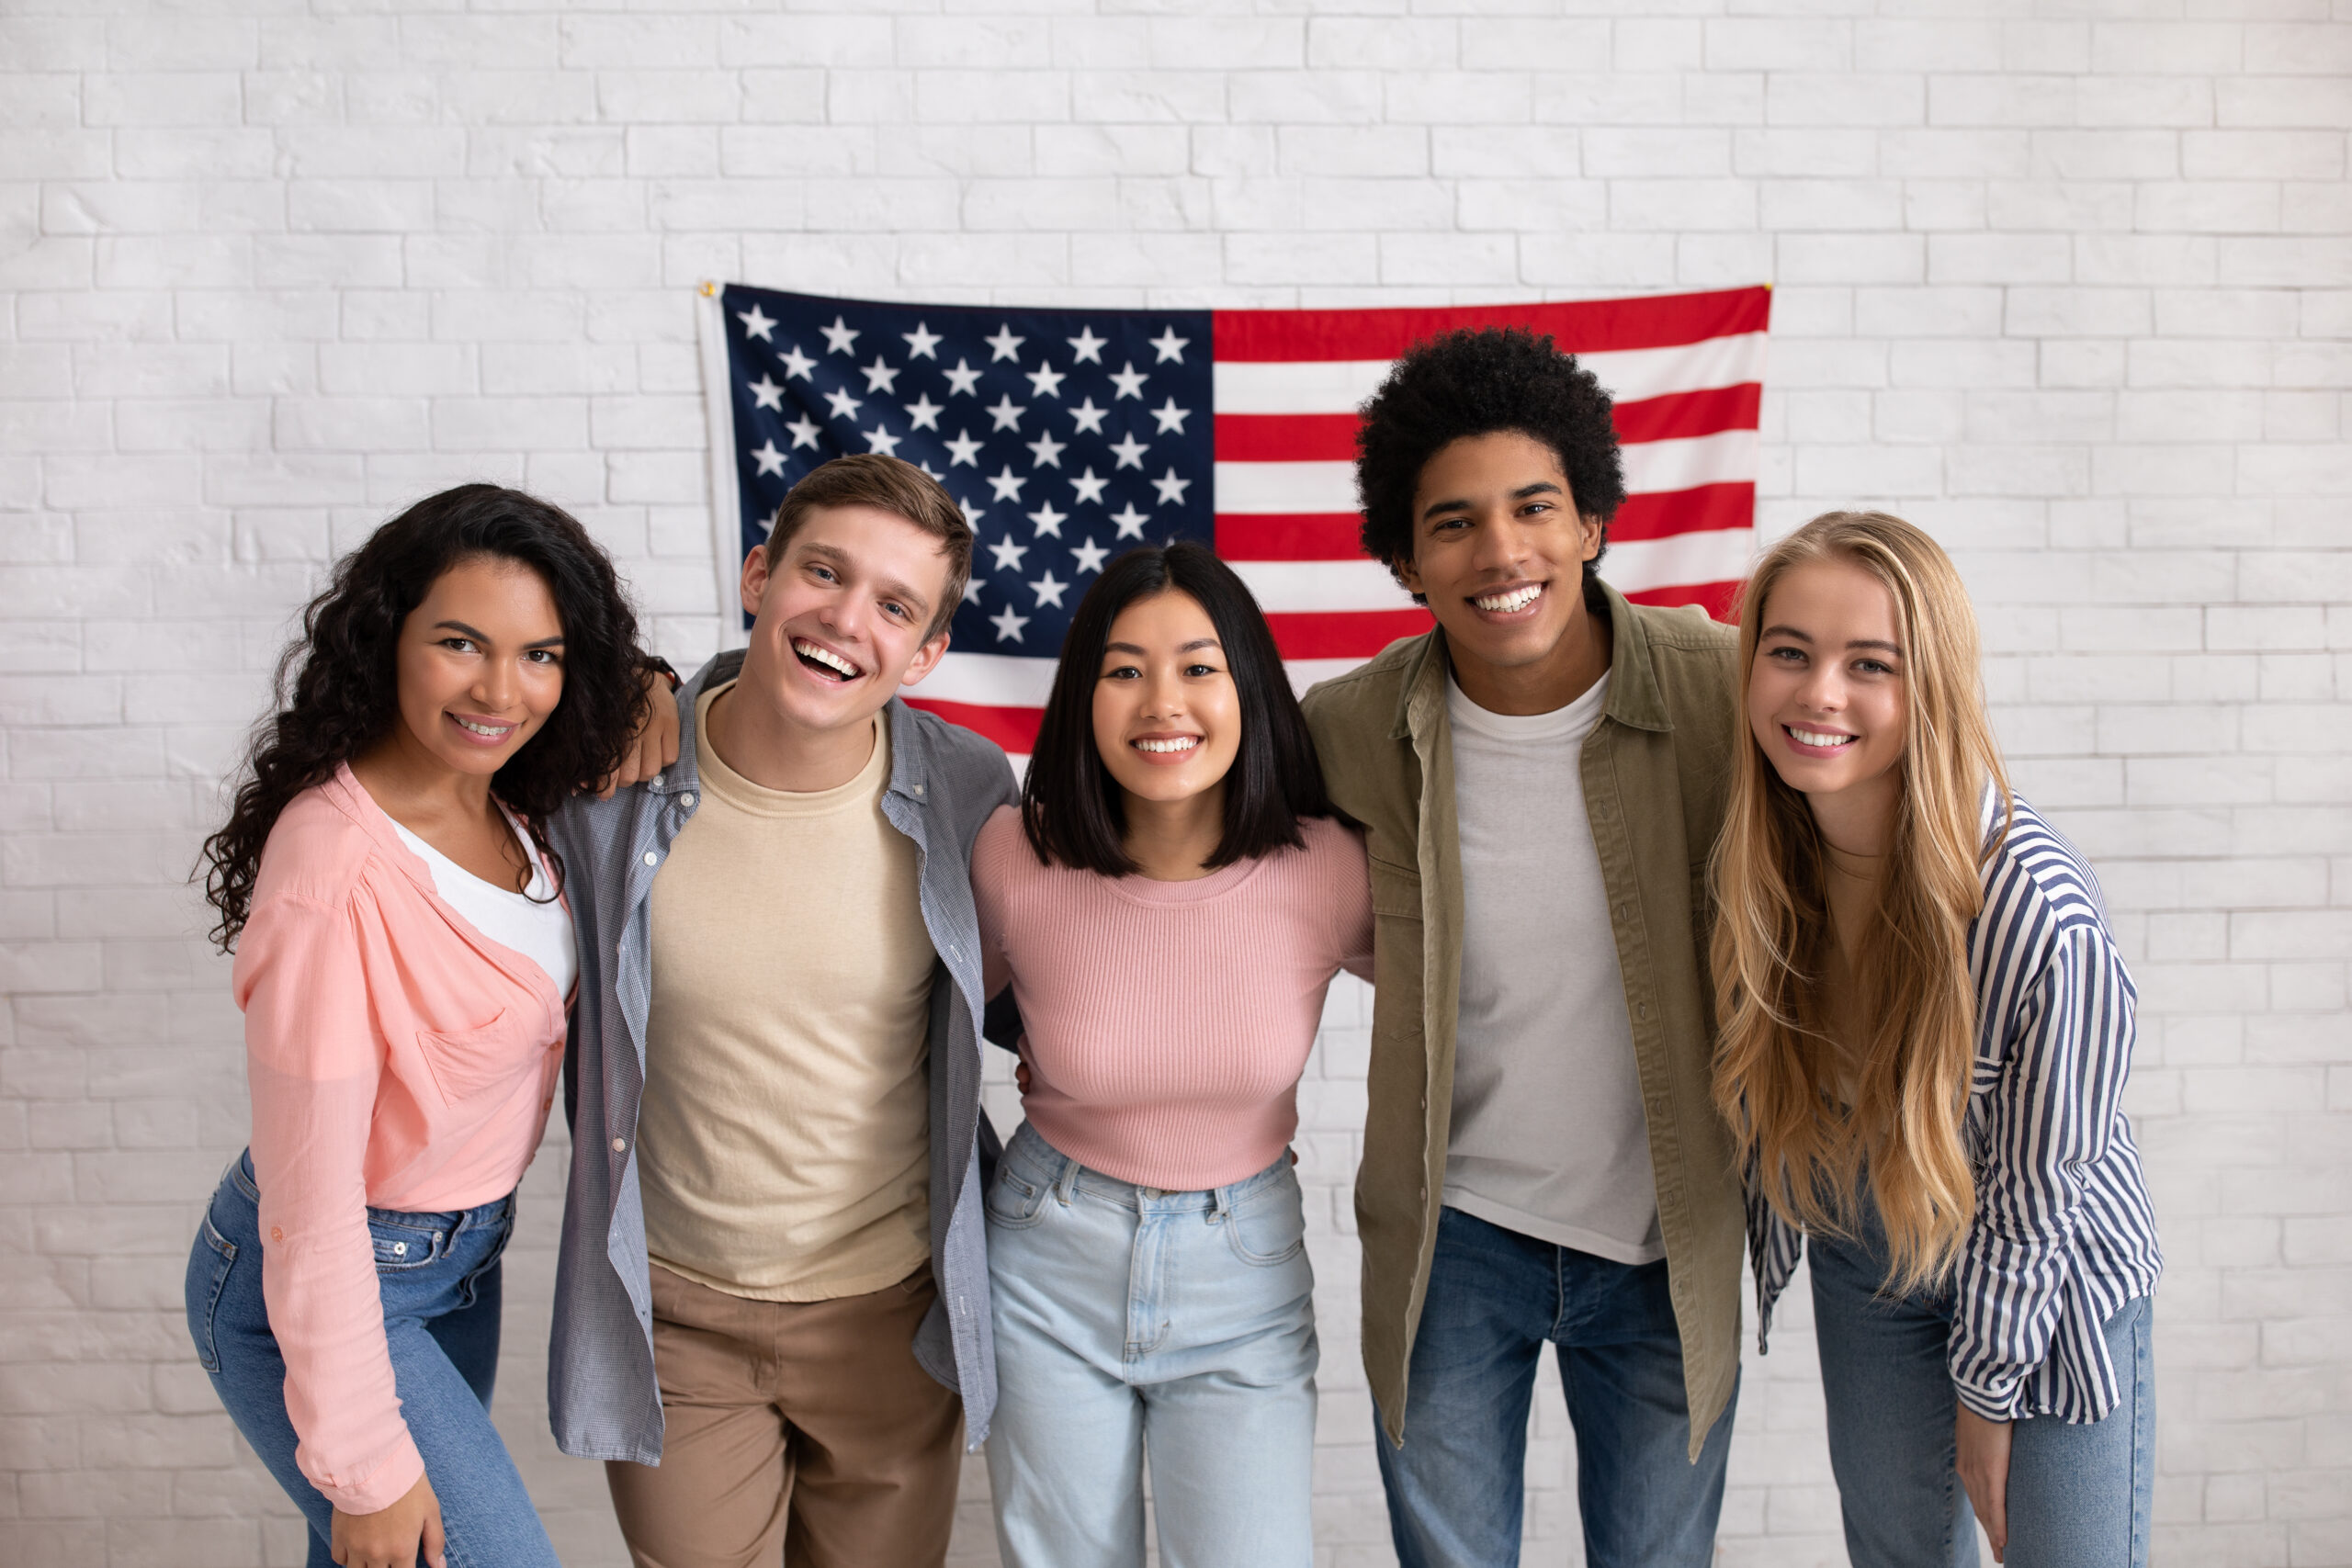 Fun education, language courses, learn english and exchange students. Young smiling people of different nationalities hug in college with large USA flag on white brick wall, free space, studio shot